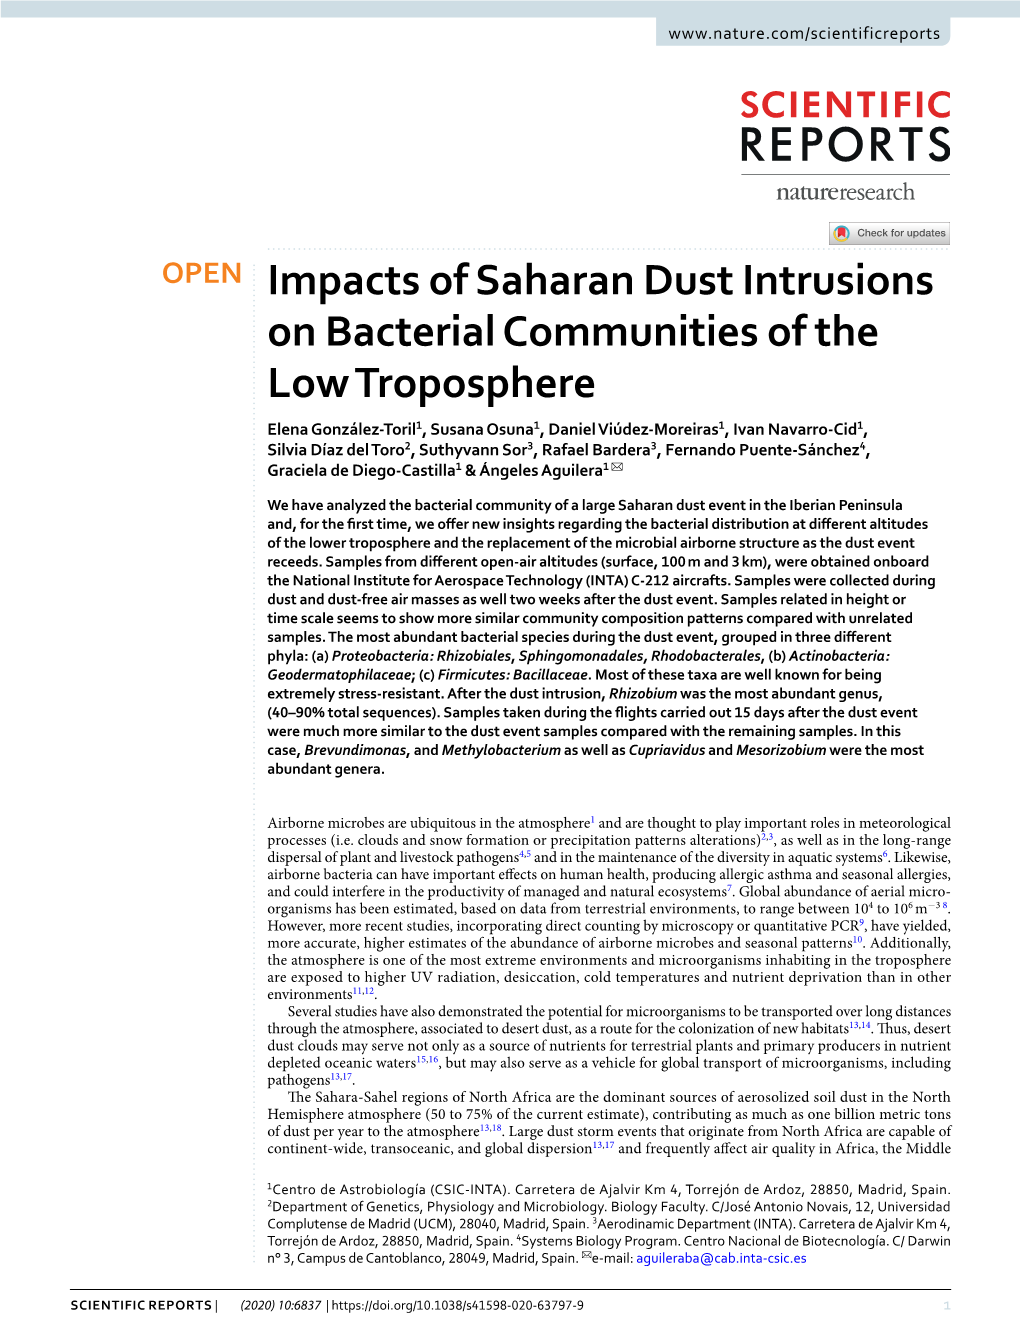 Impacts of Saharan Dust Intrusions on Bacterial Communities of the Low